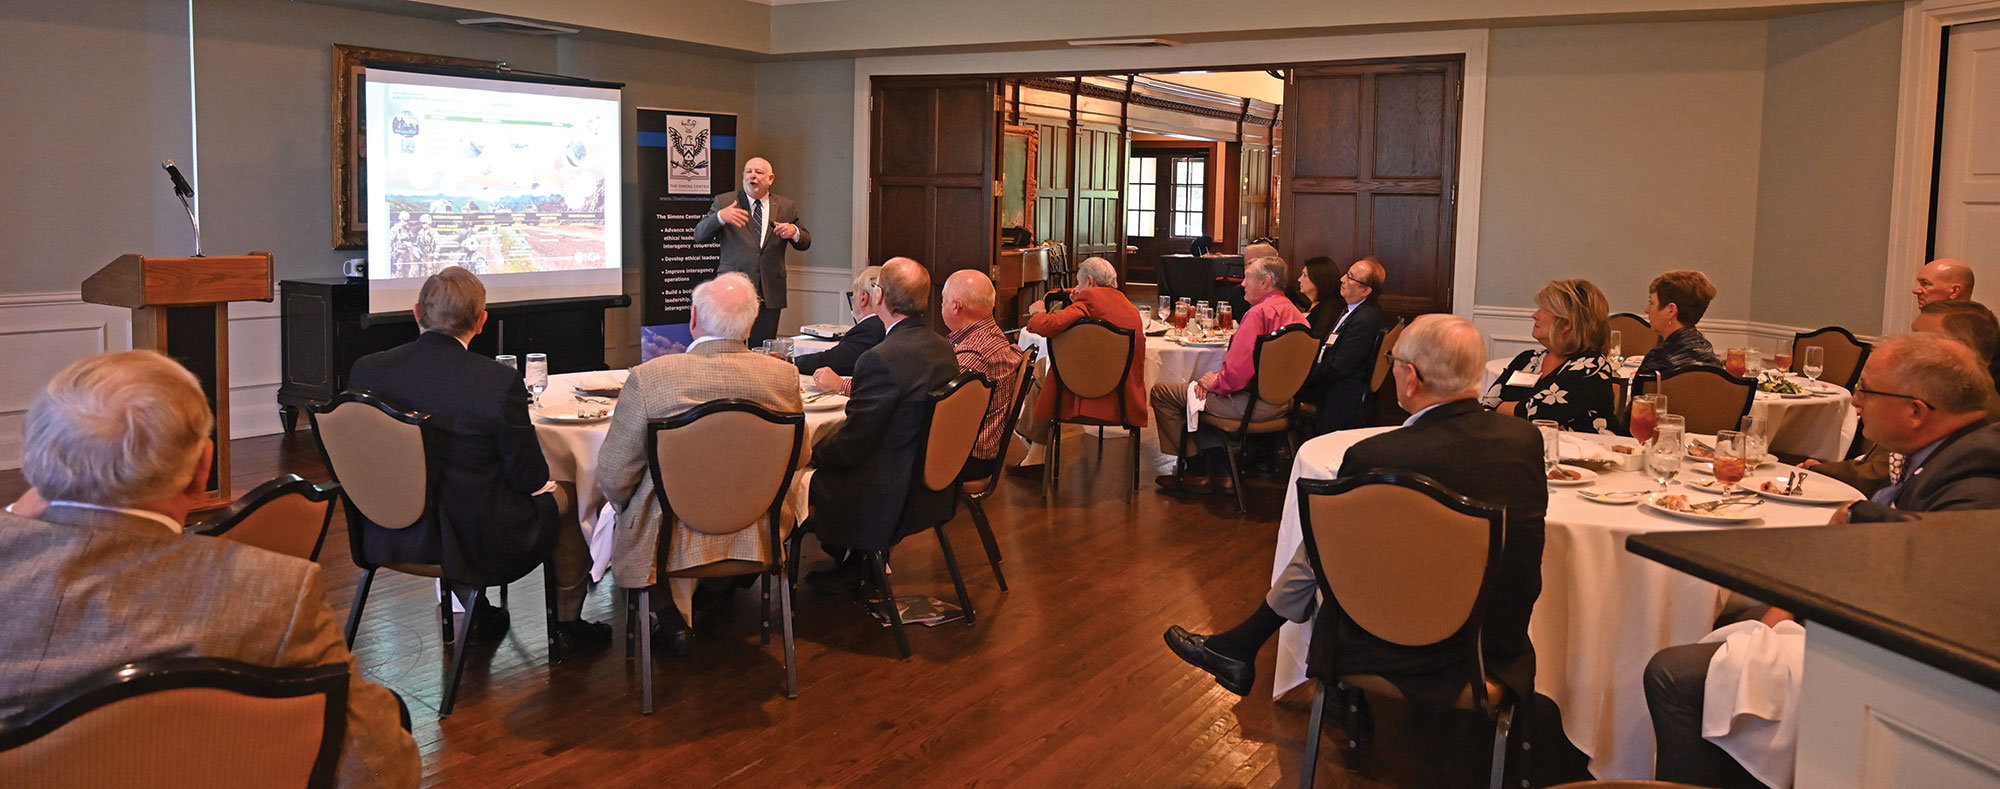 Mr. Ralph Erwin, the strategic advisor for Tesla Government, Inc., delivers his presentation on geospatial intelligence for the Arter-Rowland National Security Forum luncheon event on Sept. 29, 2022, at the Carriage Club in Kansas City.